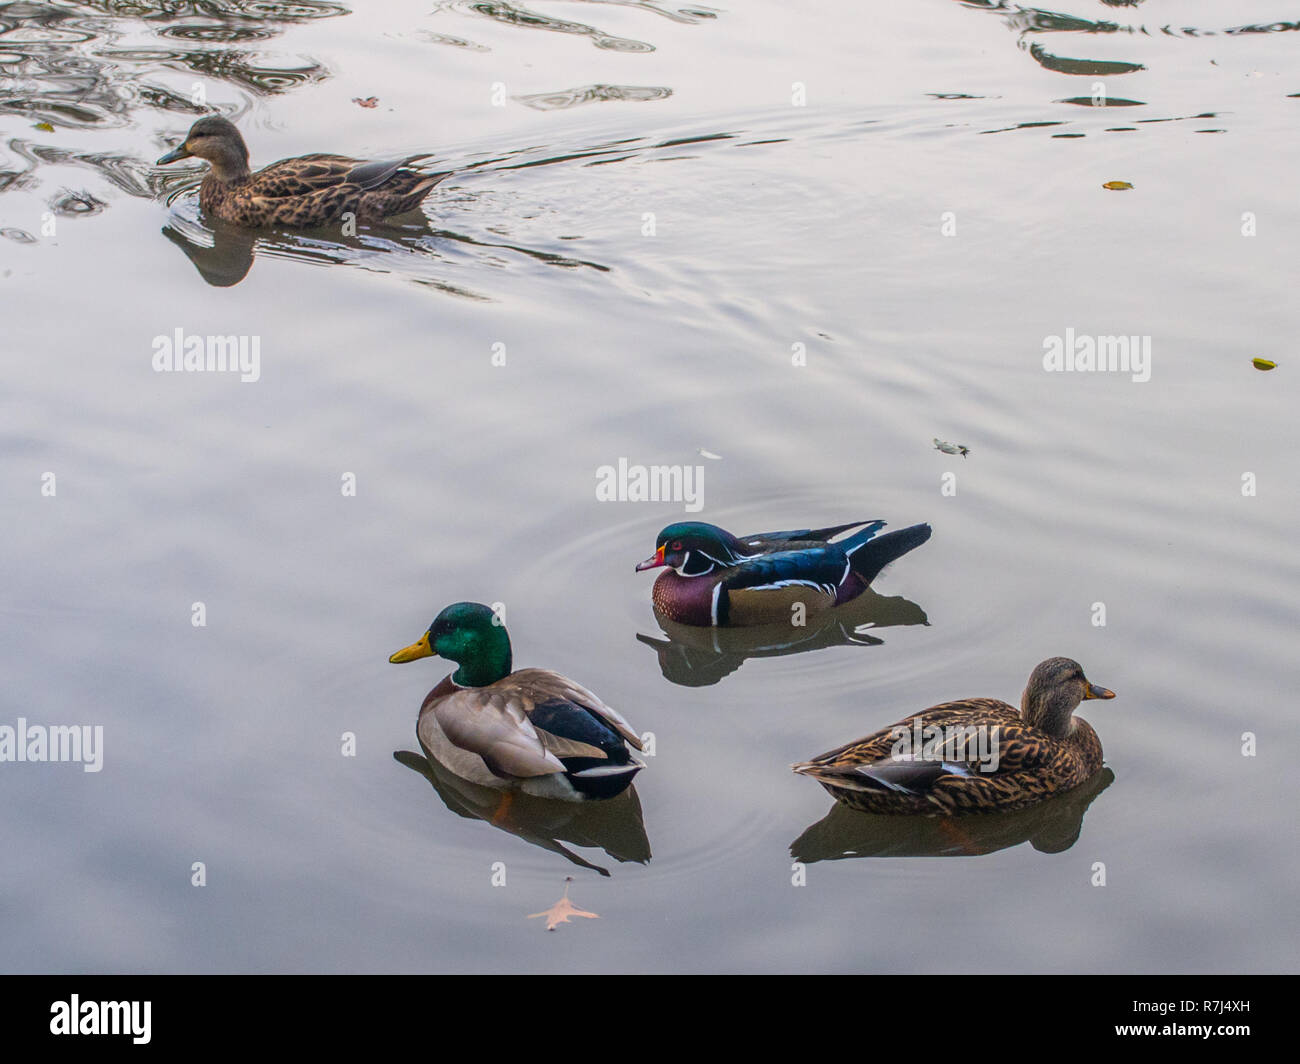 Mandarin duck swimming with another ducks on a pond Stock Photo